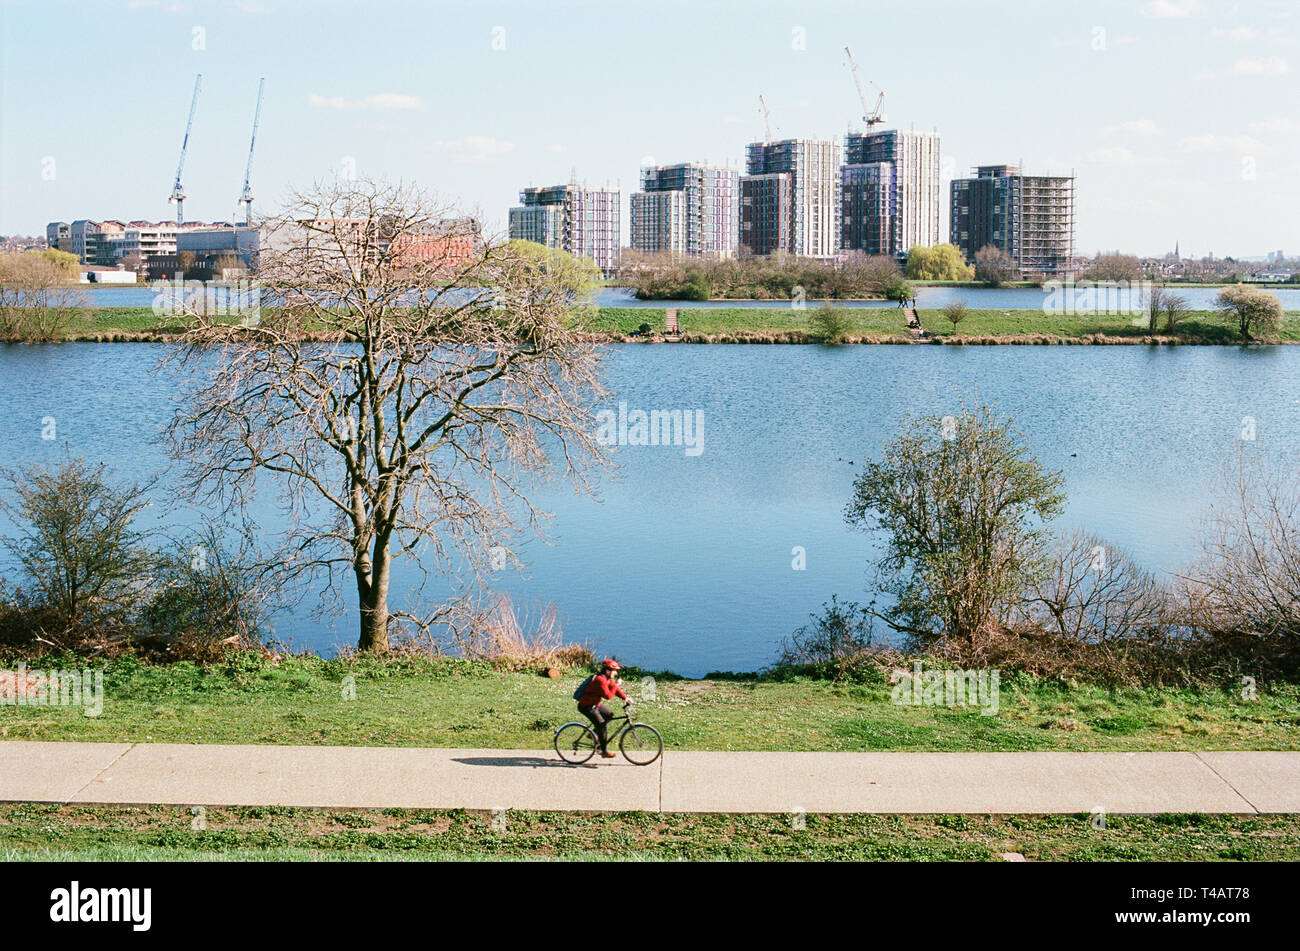 Cyclist on a footpath by Low Maynard Reservoir on Walthamstow Wetlands, North East London UK, with new apartments in the background Stock Photo